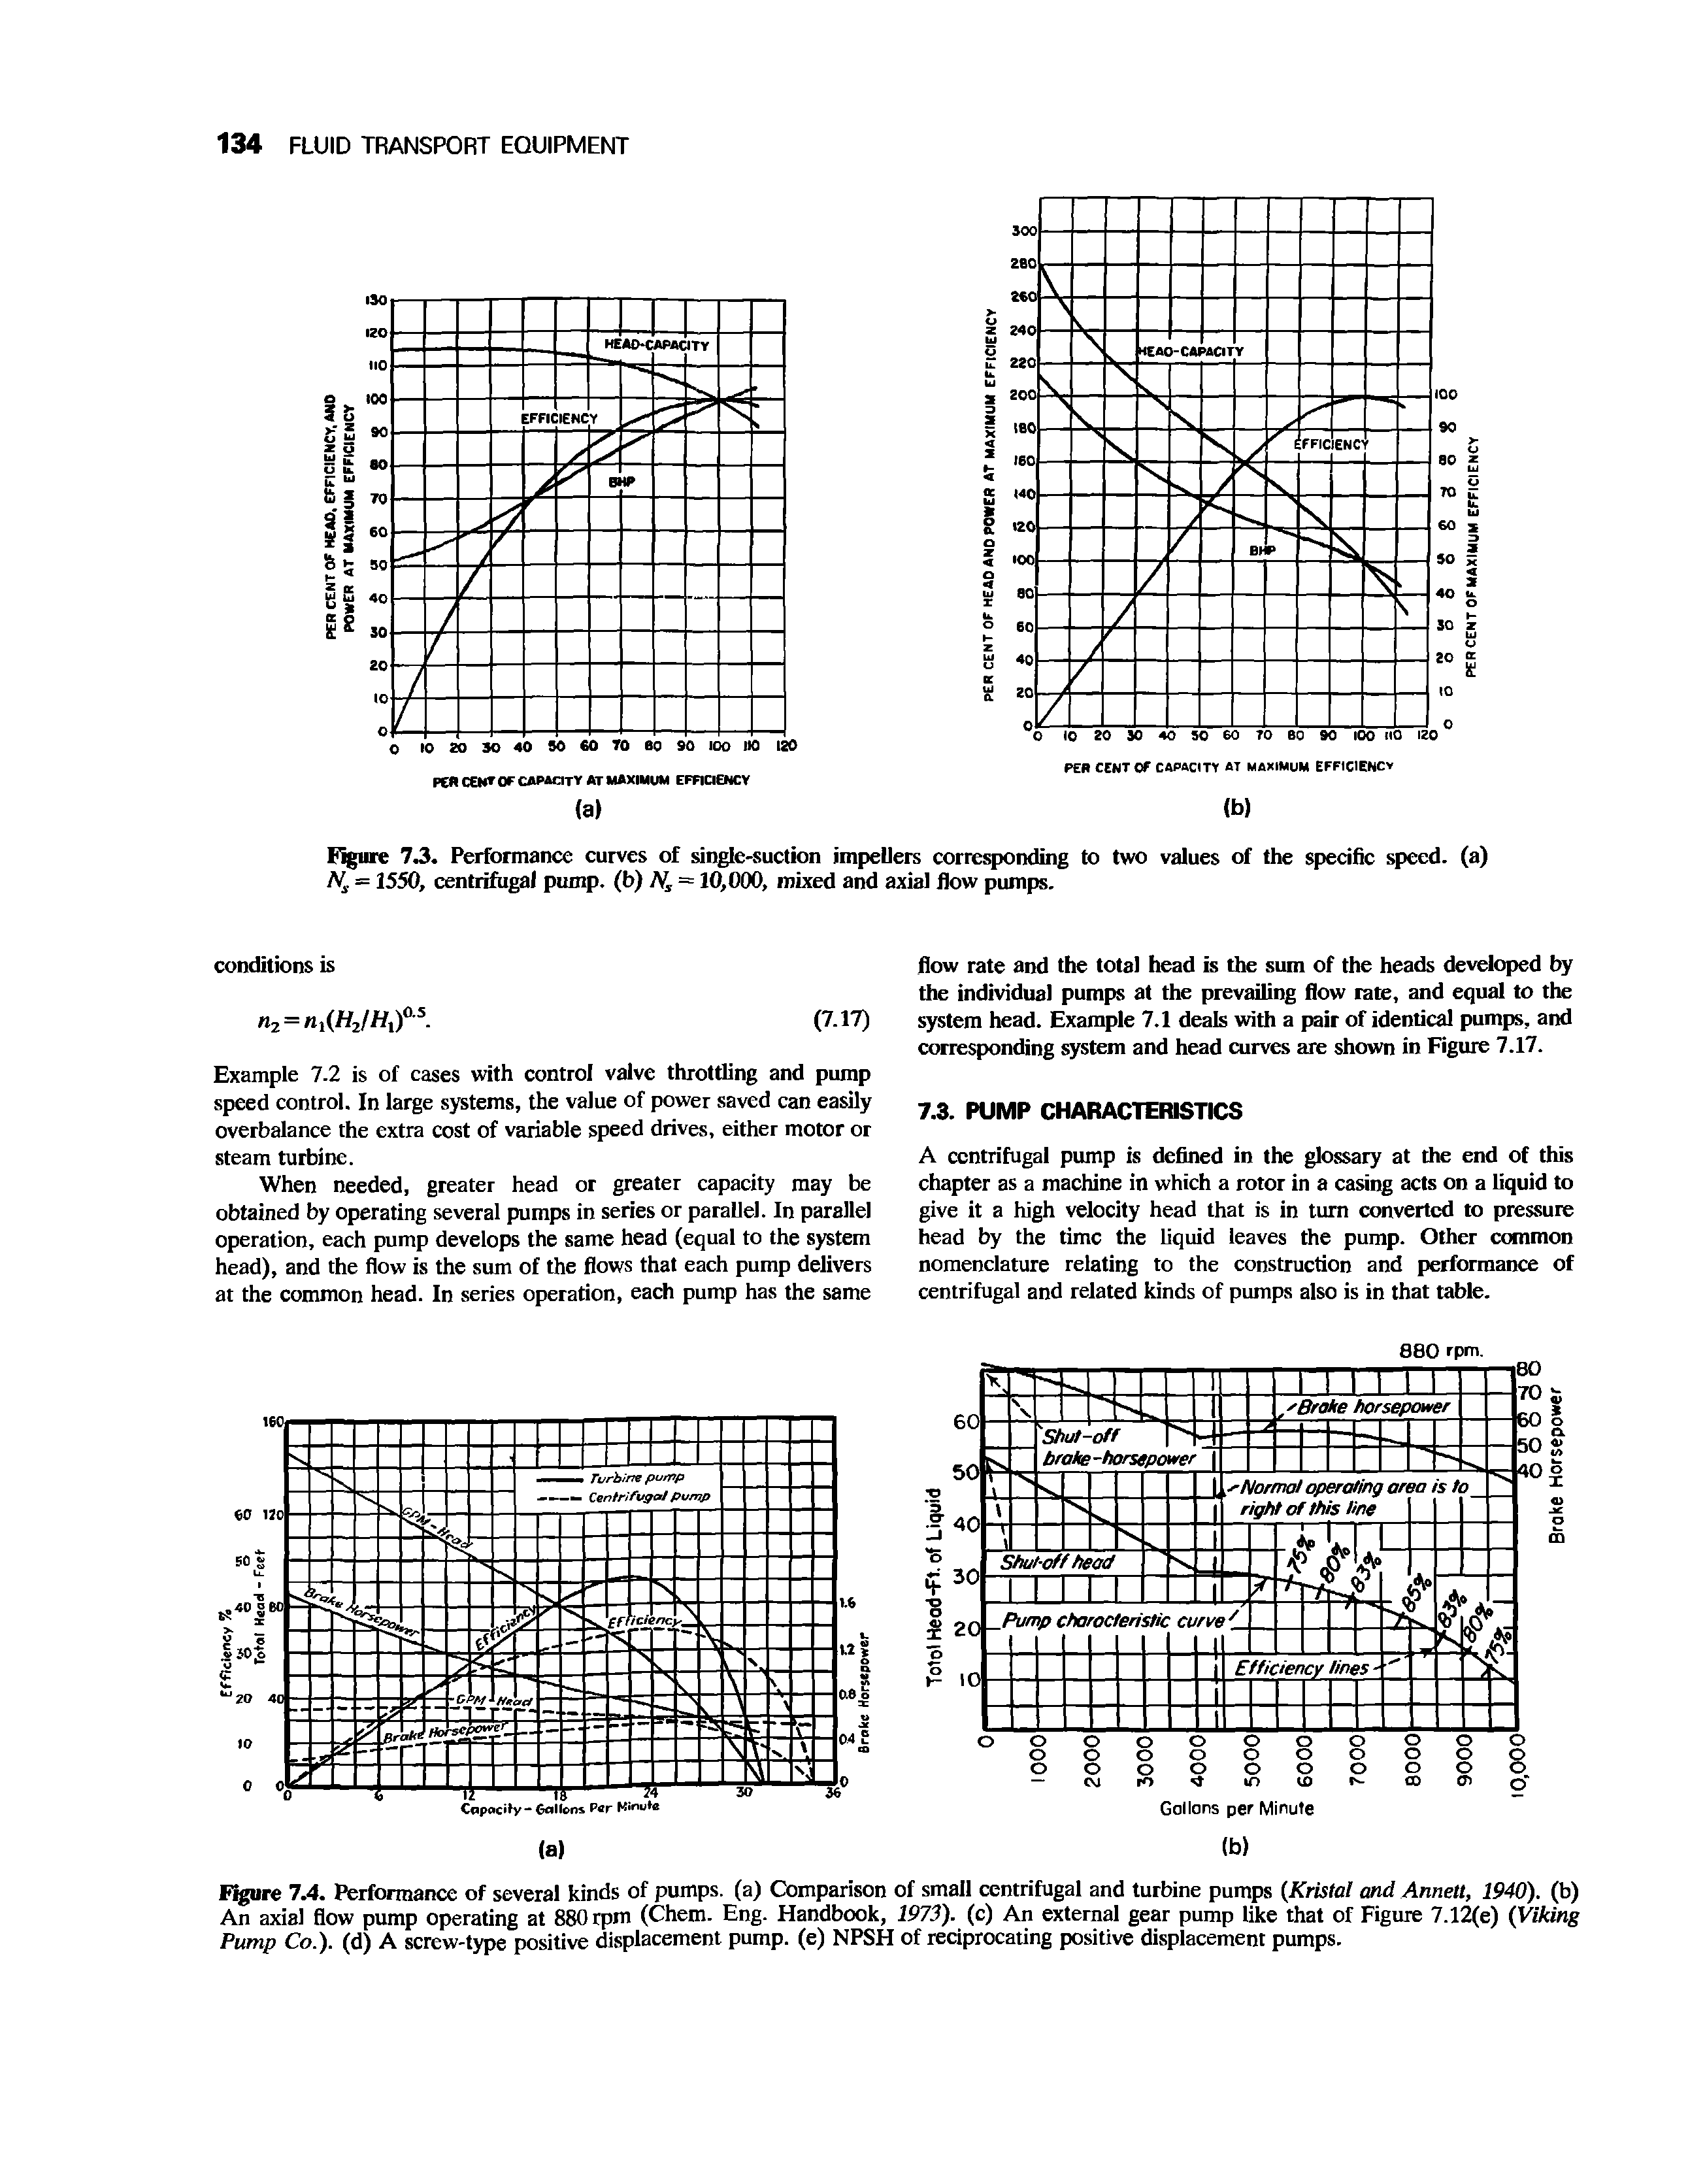 Figure 7.4. Performance of several kinds of pumps, (a) Comparison of small centrifugal and turbine pumps (Krista and Annett, 1940). (b) An axial flow pump operating at 880 rpm (Chem. Eng. Handbook, 1973). (c) An external gear pump like that of Figure 7.12(e) (Viking Pump Co.), (d) A screw-type positive displacement pump, (e) NPSH of reciprocating positive displacement pumps.